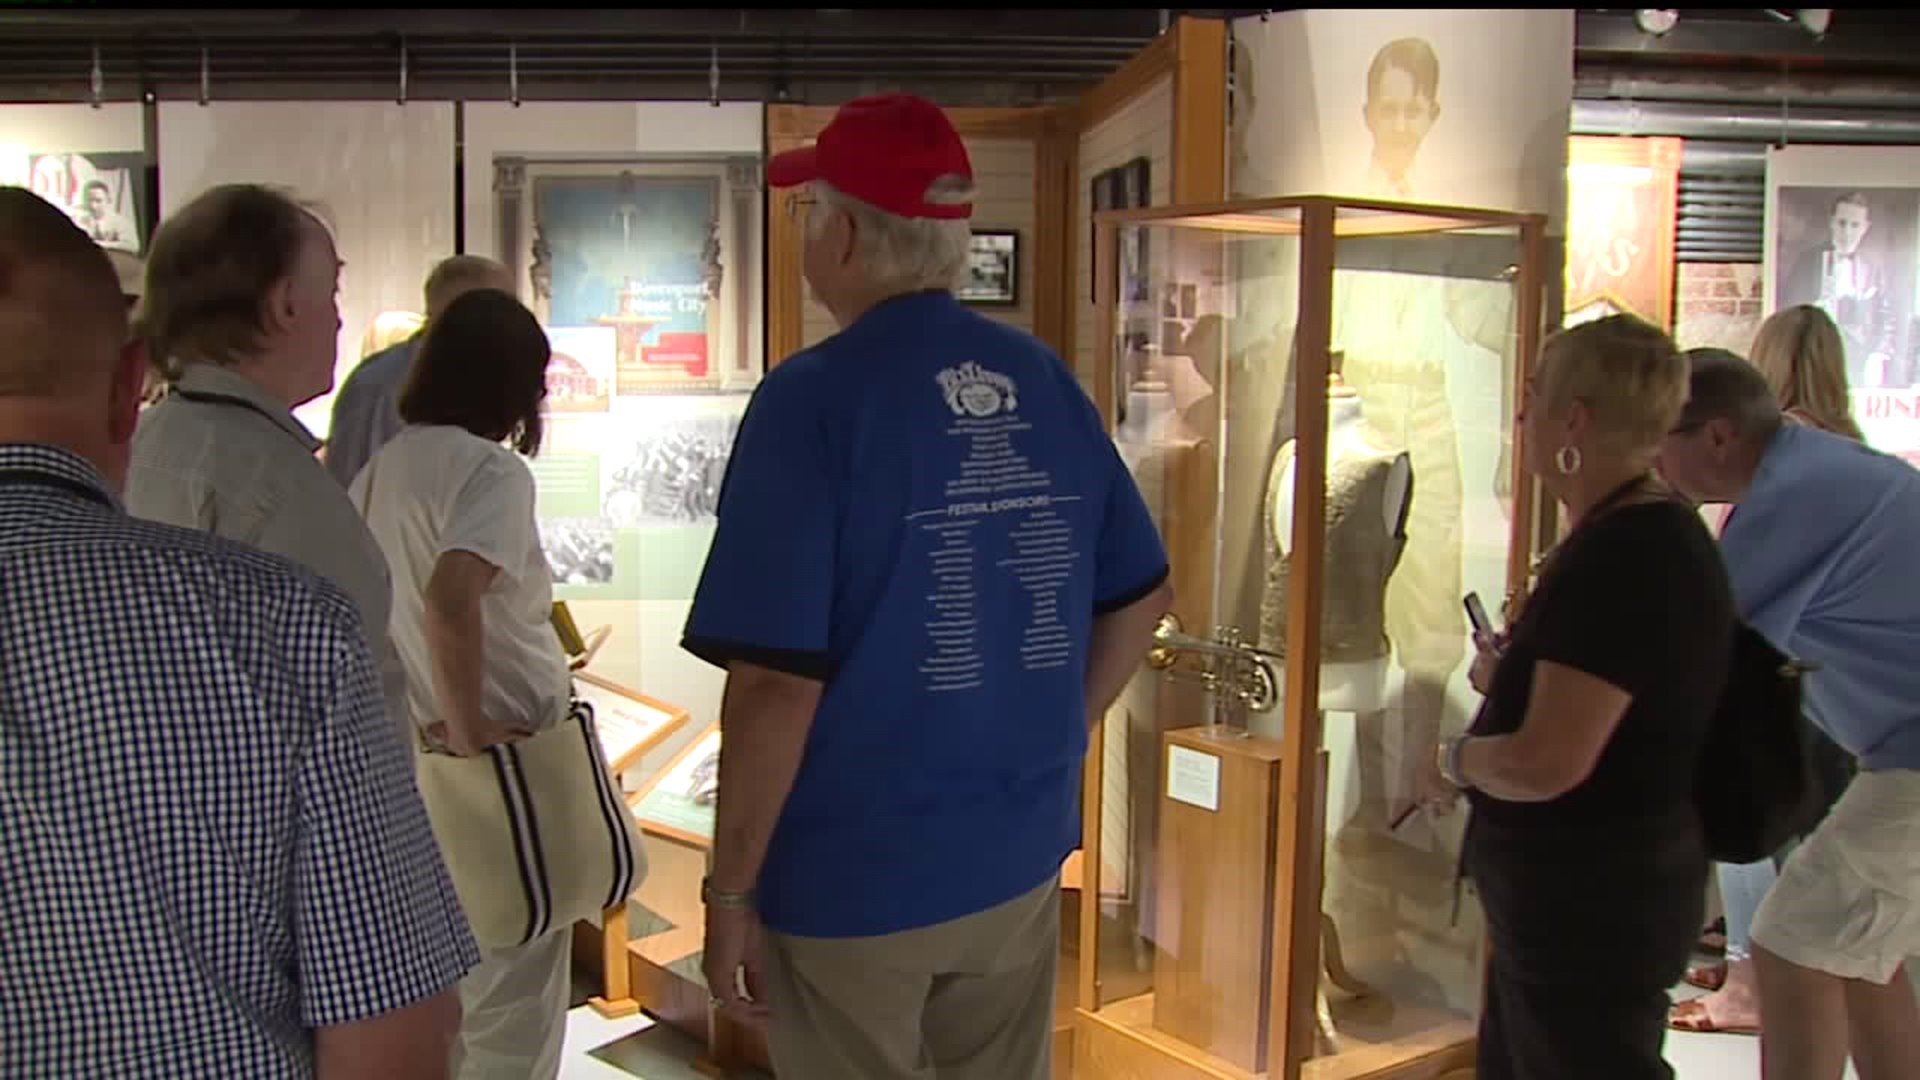 Bix museum full of visitors for jazz festival weekend